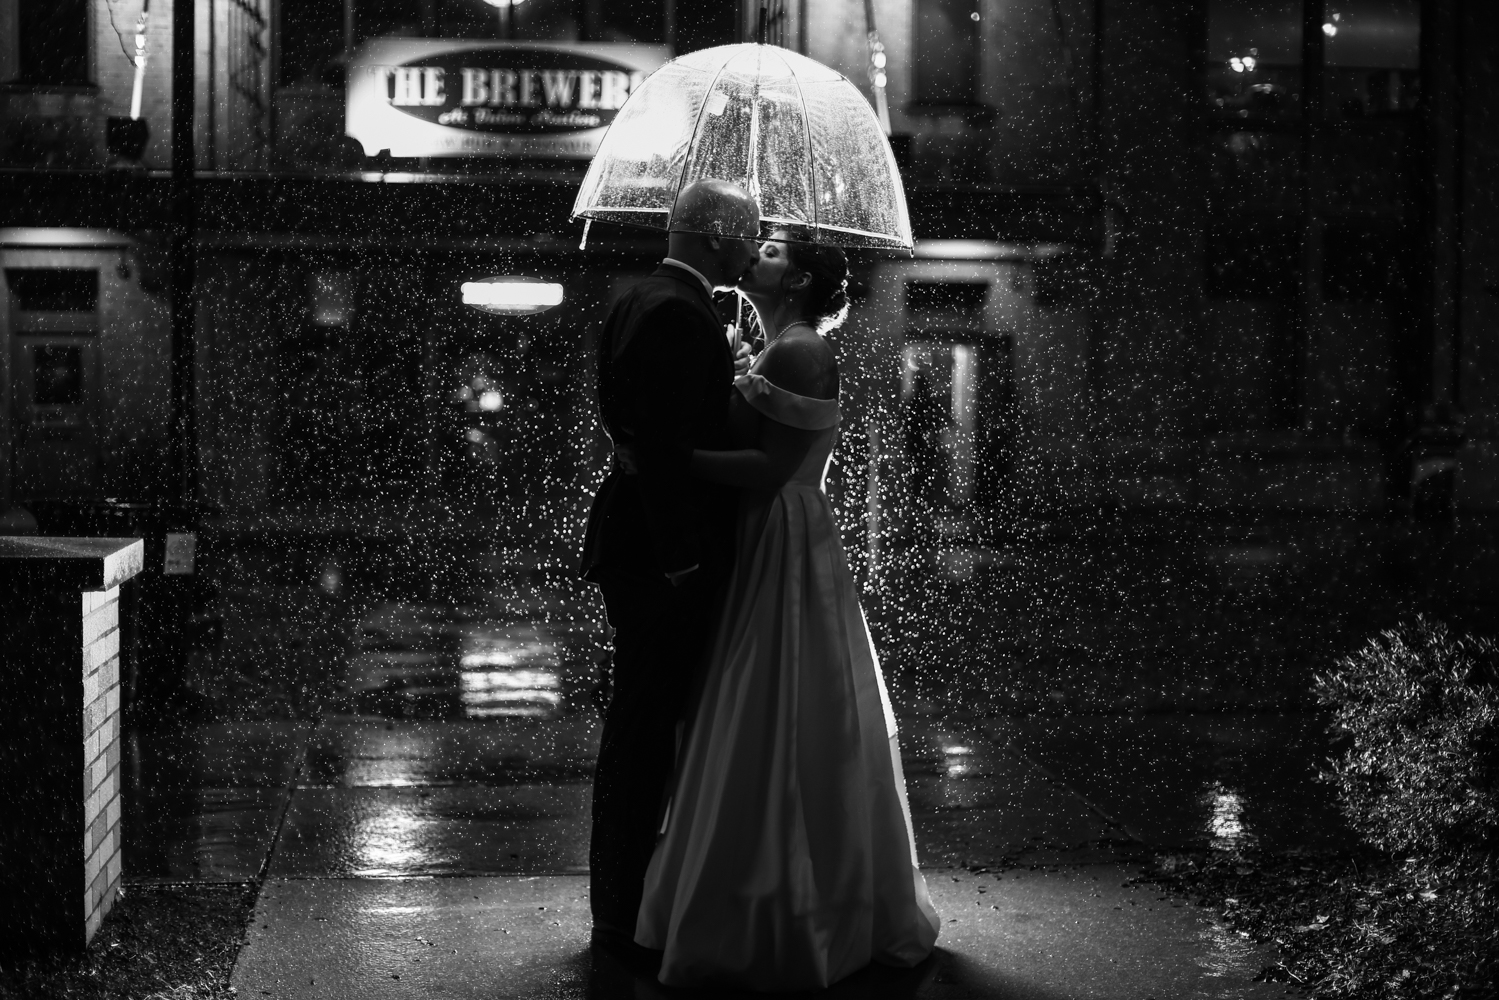 Bride and groom kiss under an umbrella at night outside the Brewerie at Union Station